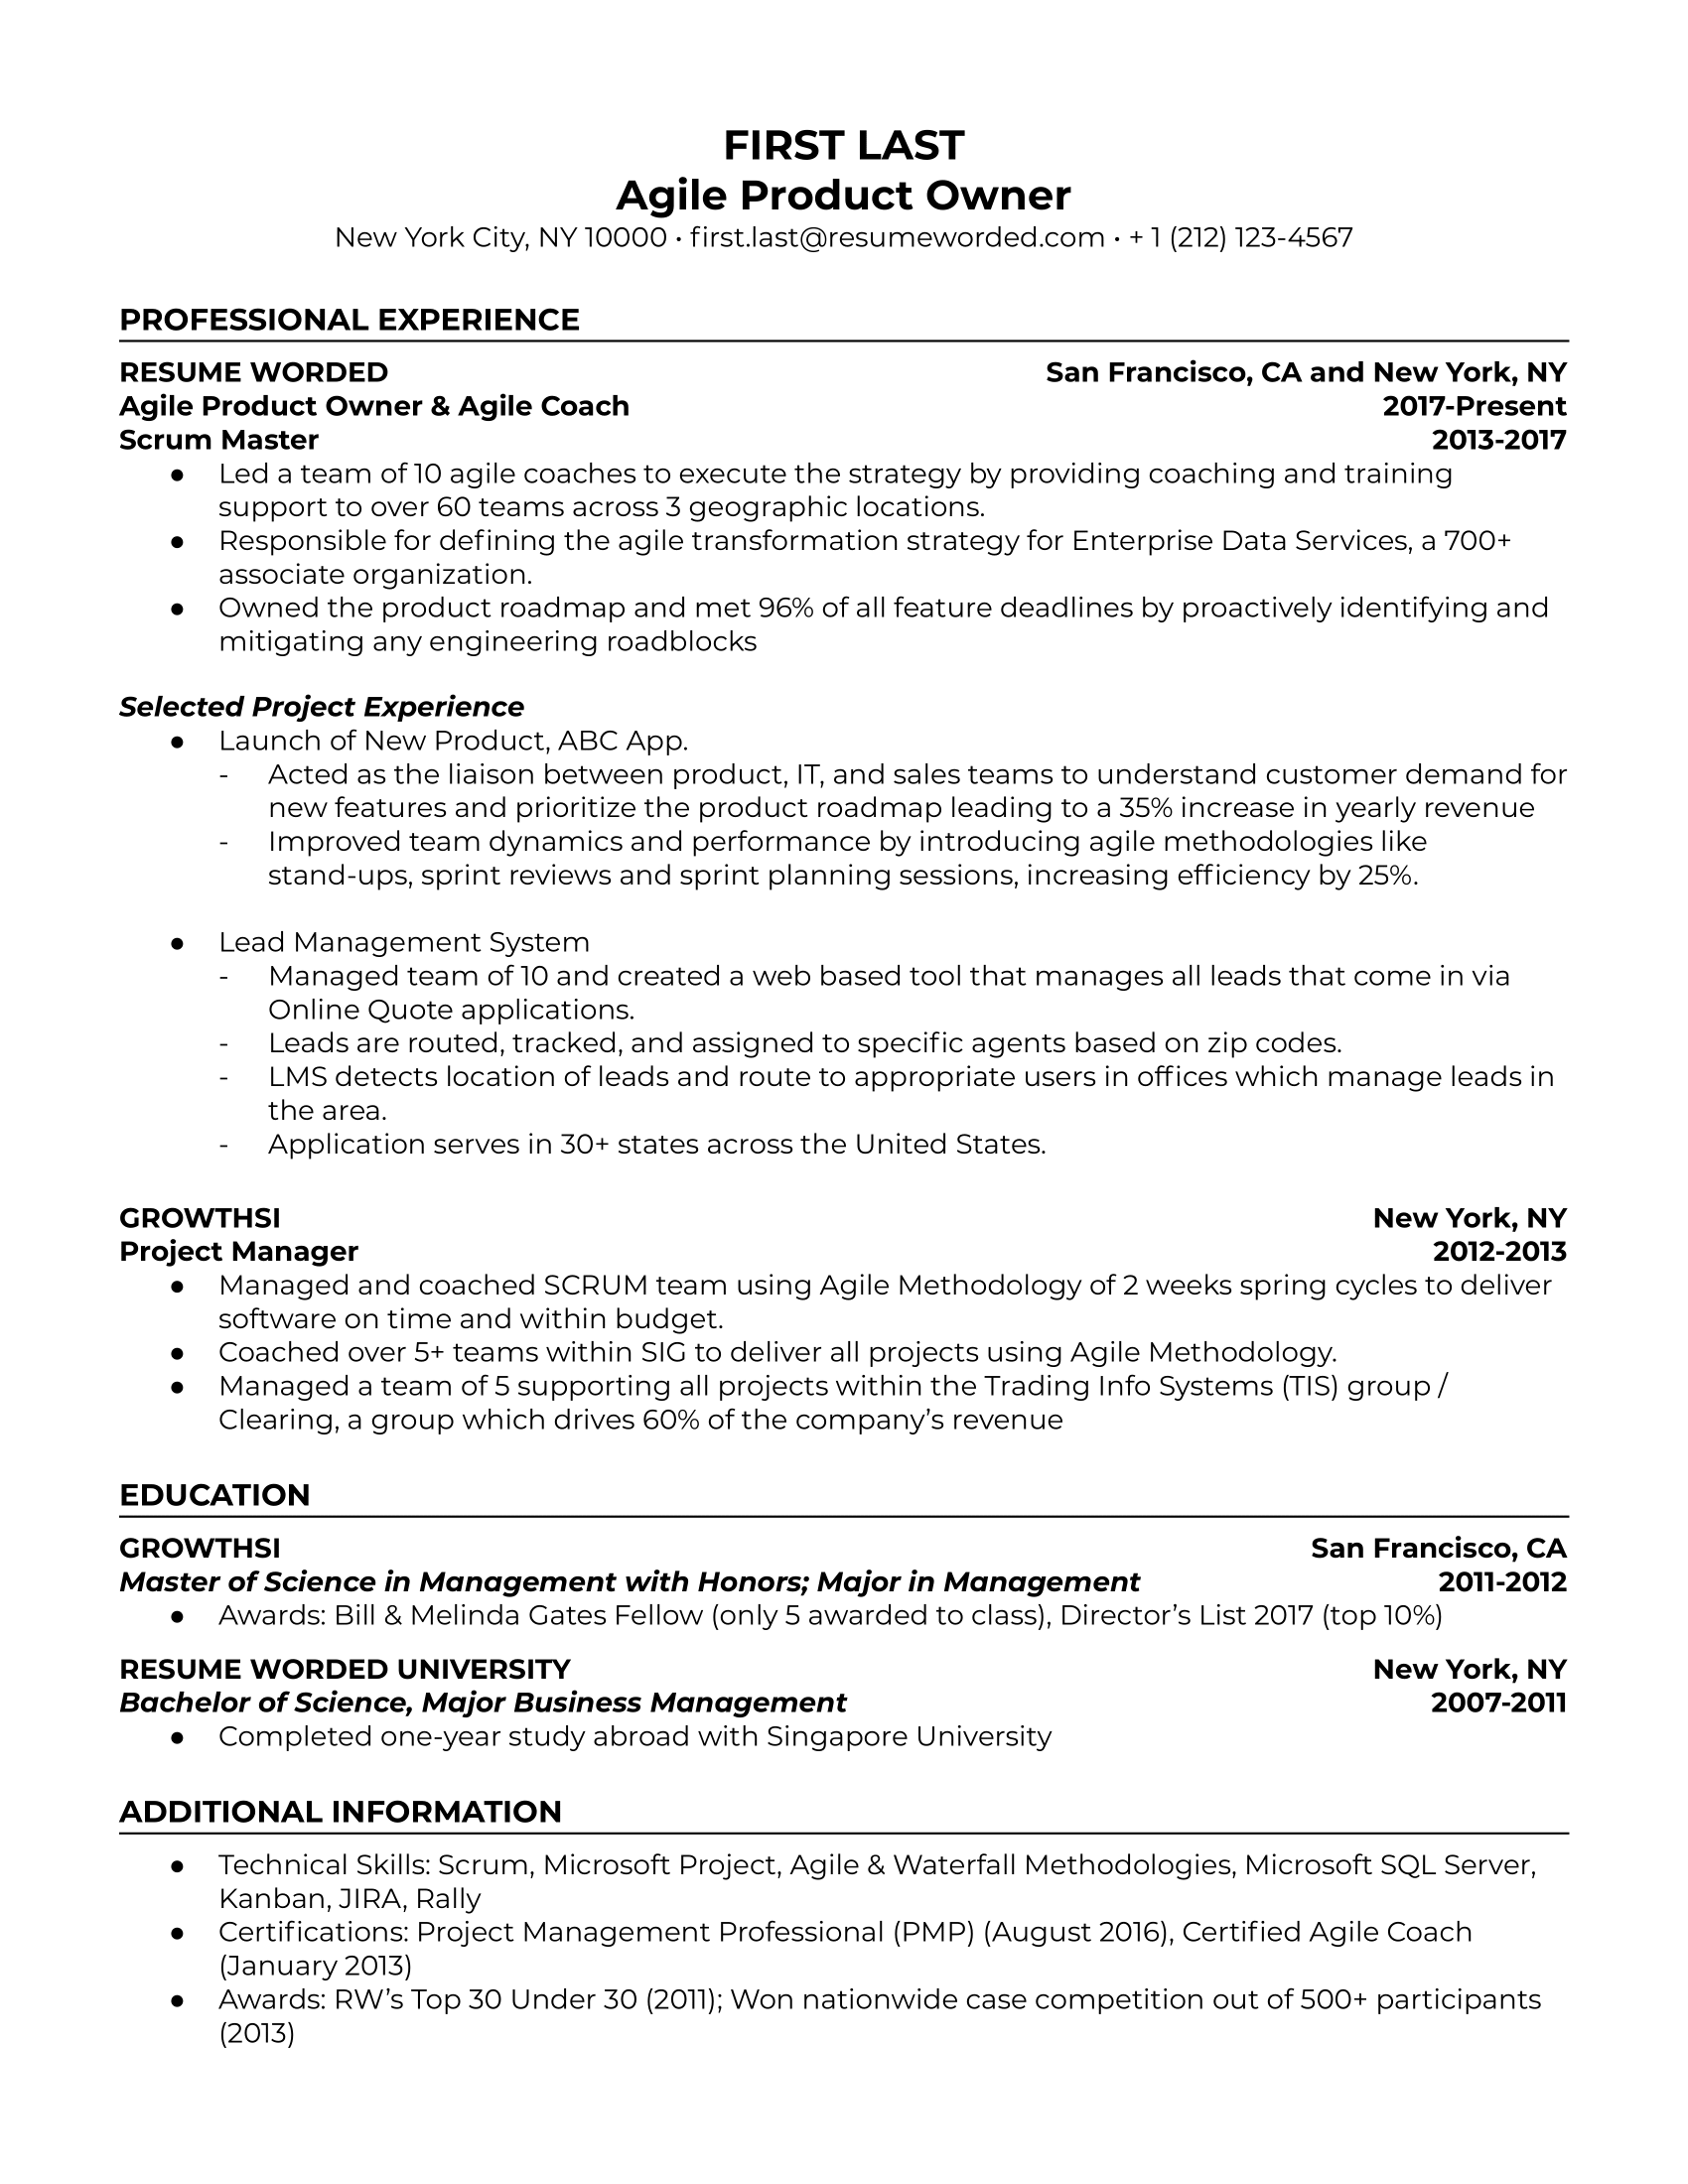 Agile product owner resume template example with a resume title using hard numbers and metrics